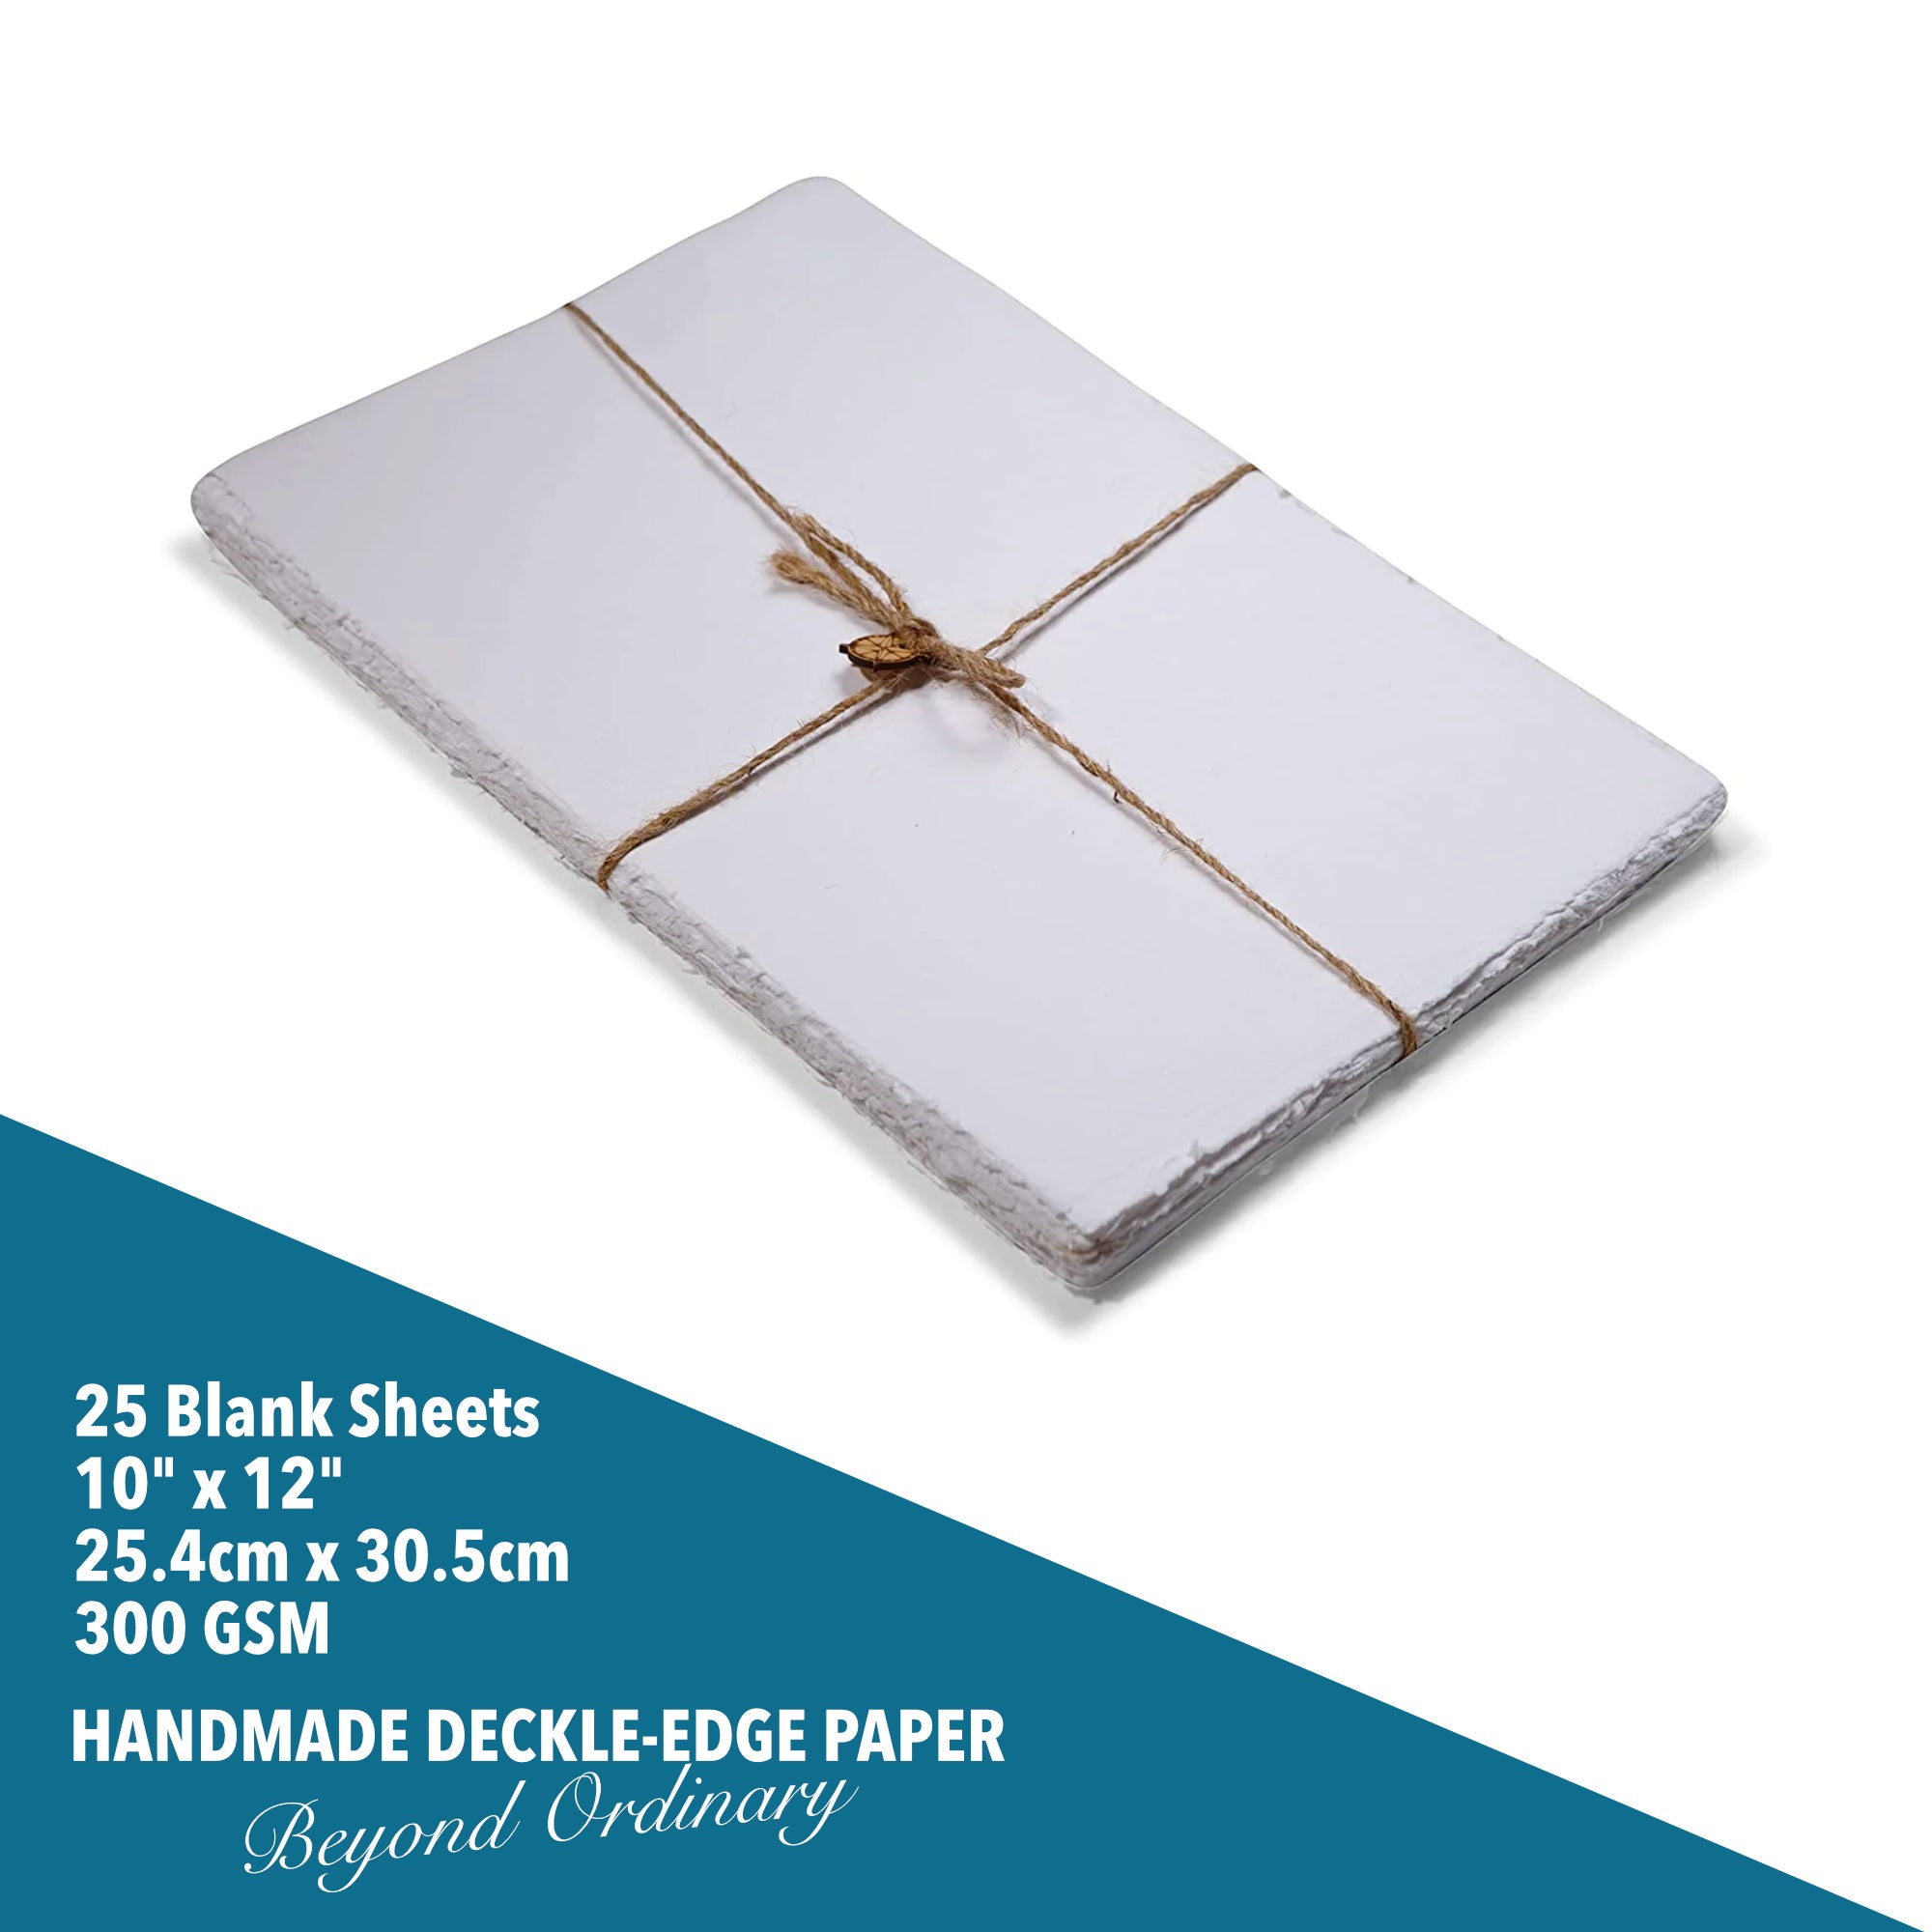 Wanderings Handmade White Deckle Edge Blank Paper - 4x6 Inches - Package of 25 - Mixed Media Loose Leaf Paper for Watercolor, Writers, Invitations